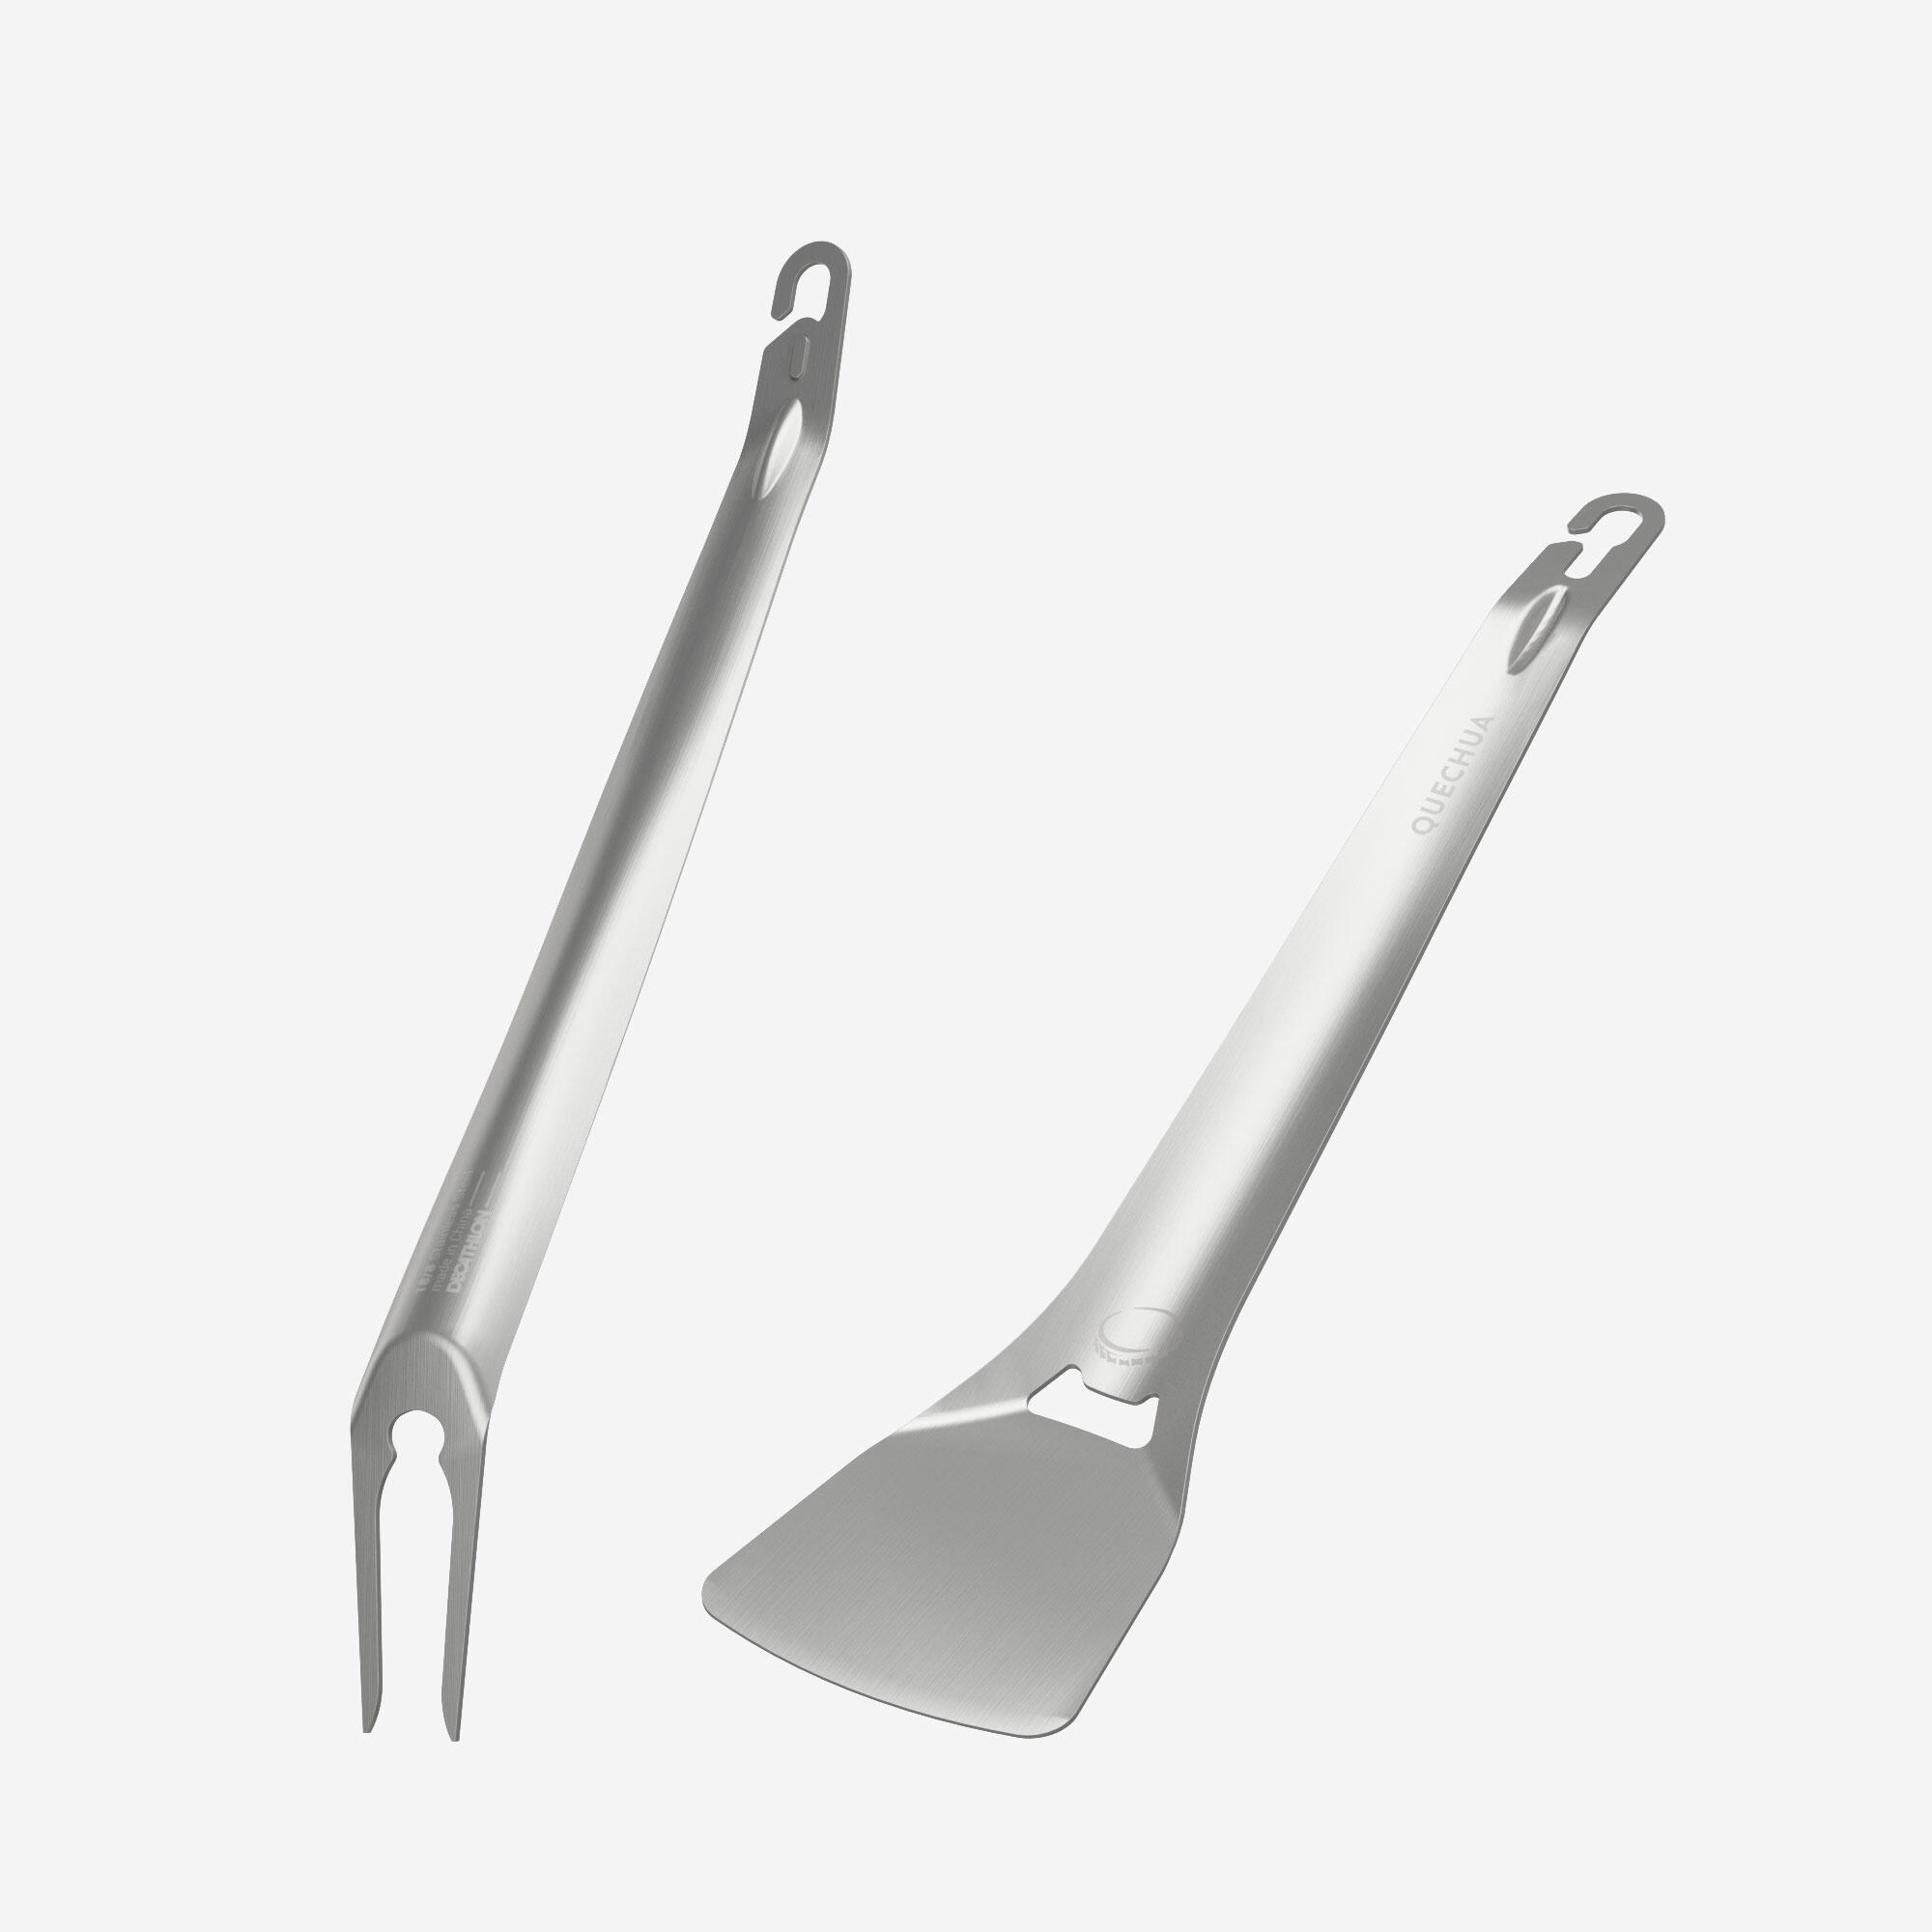 Set of 2 stainless-steel utensils, spatula and fork, for camping 2/5